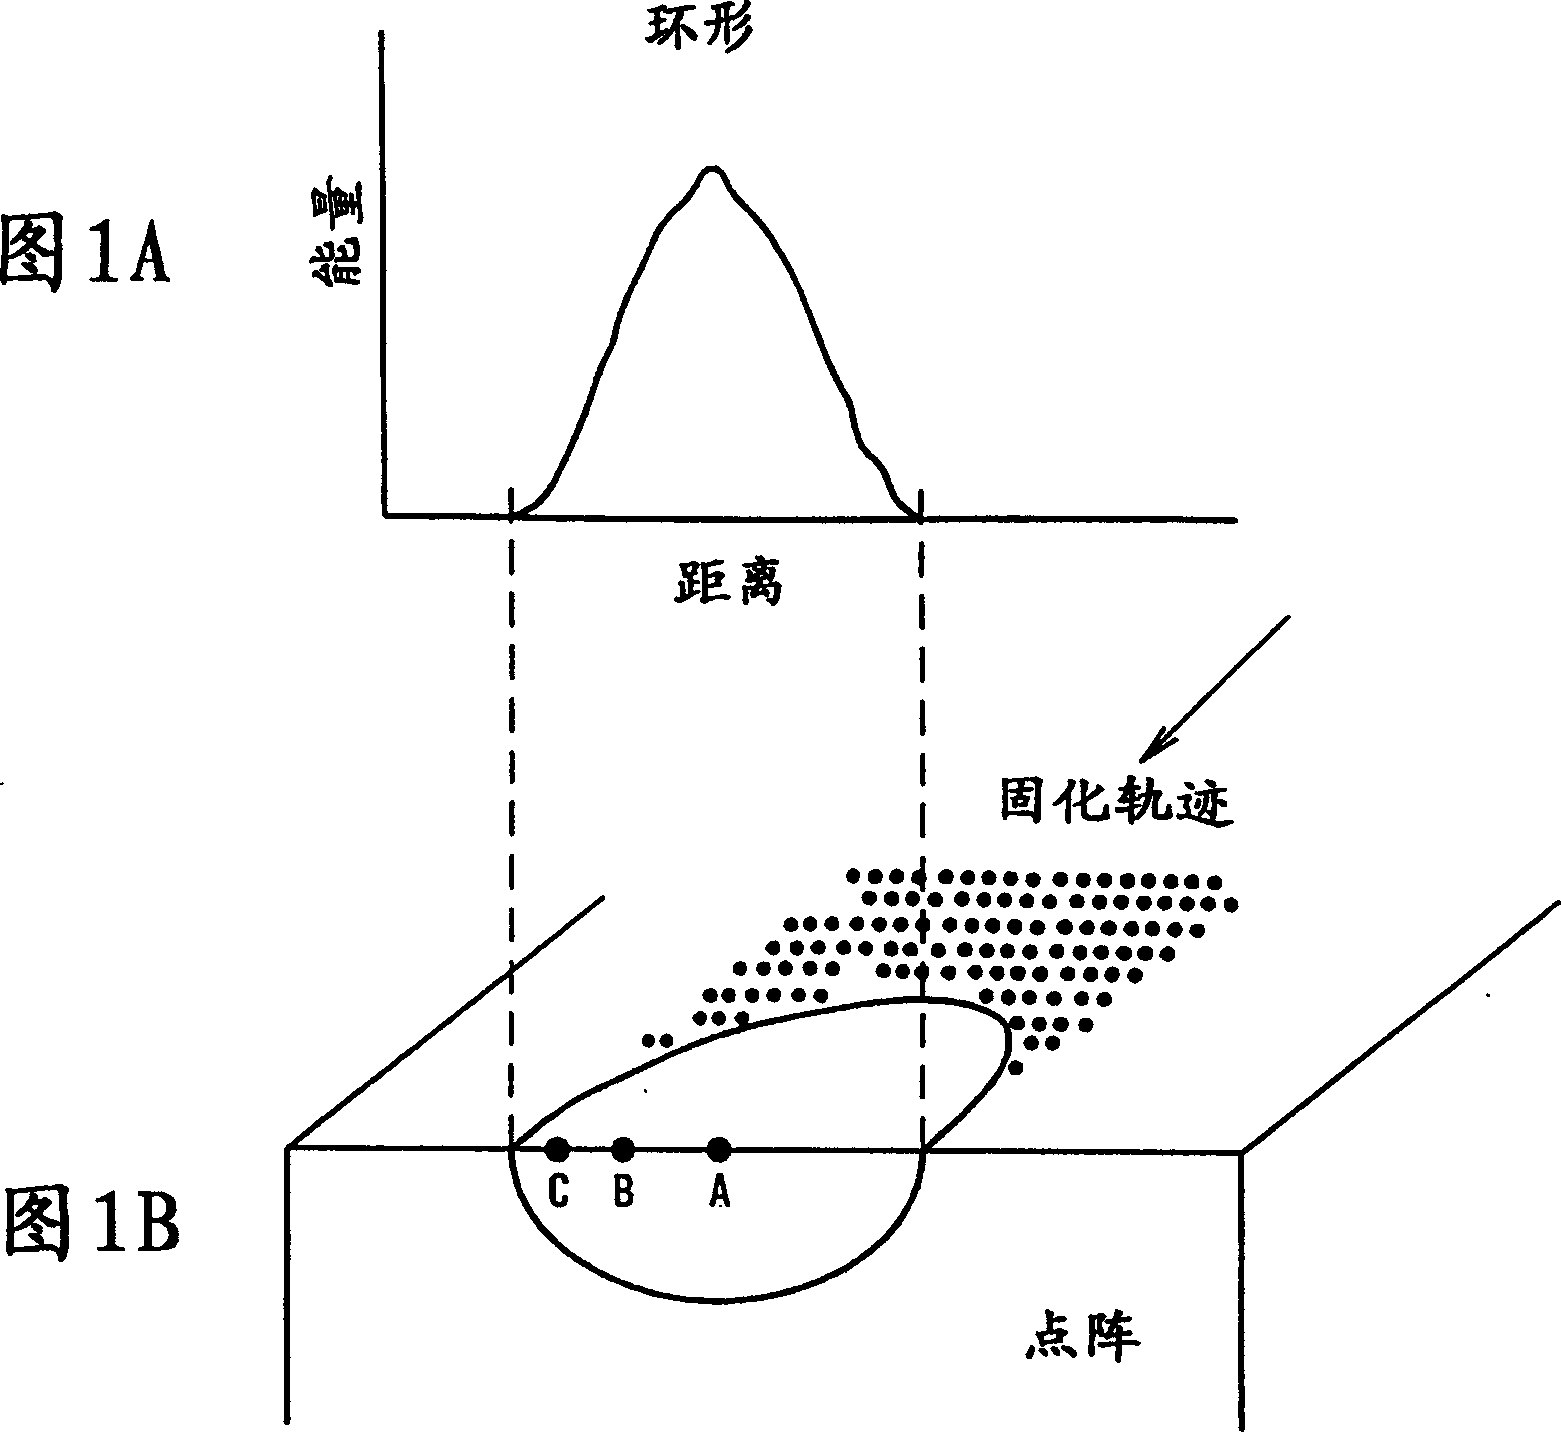 Apparatus and method for producing an improved laser beam